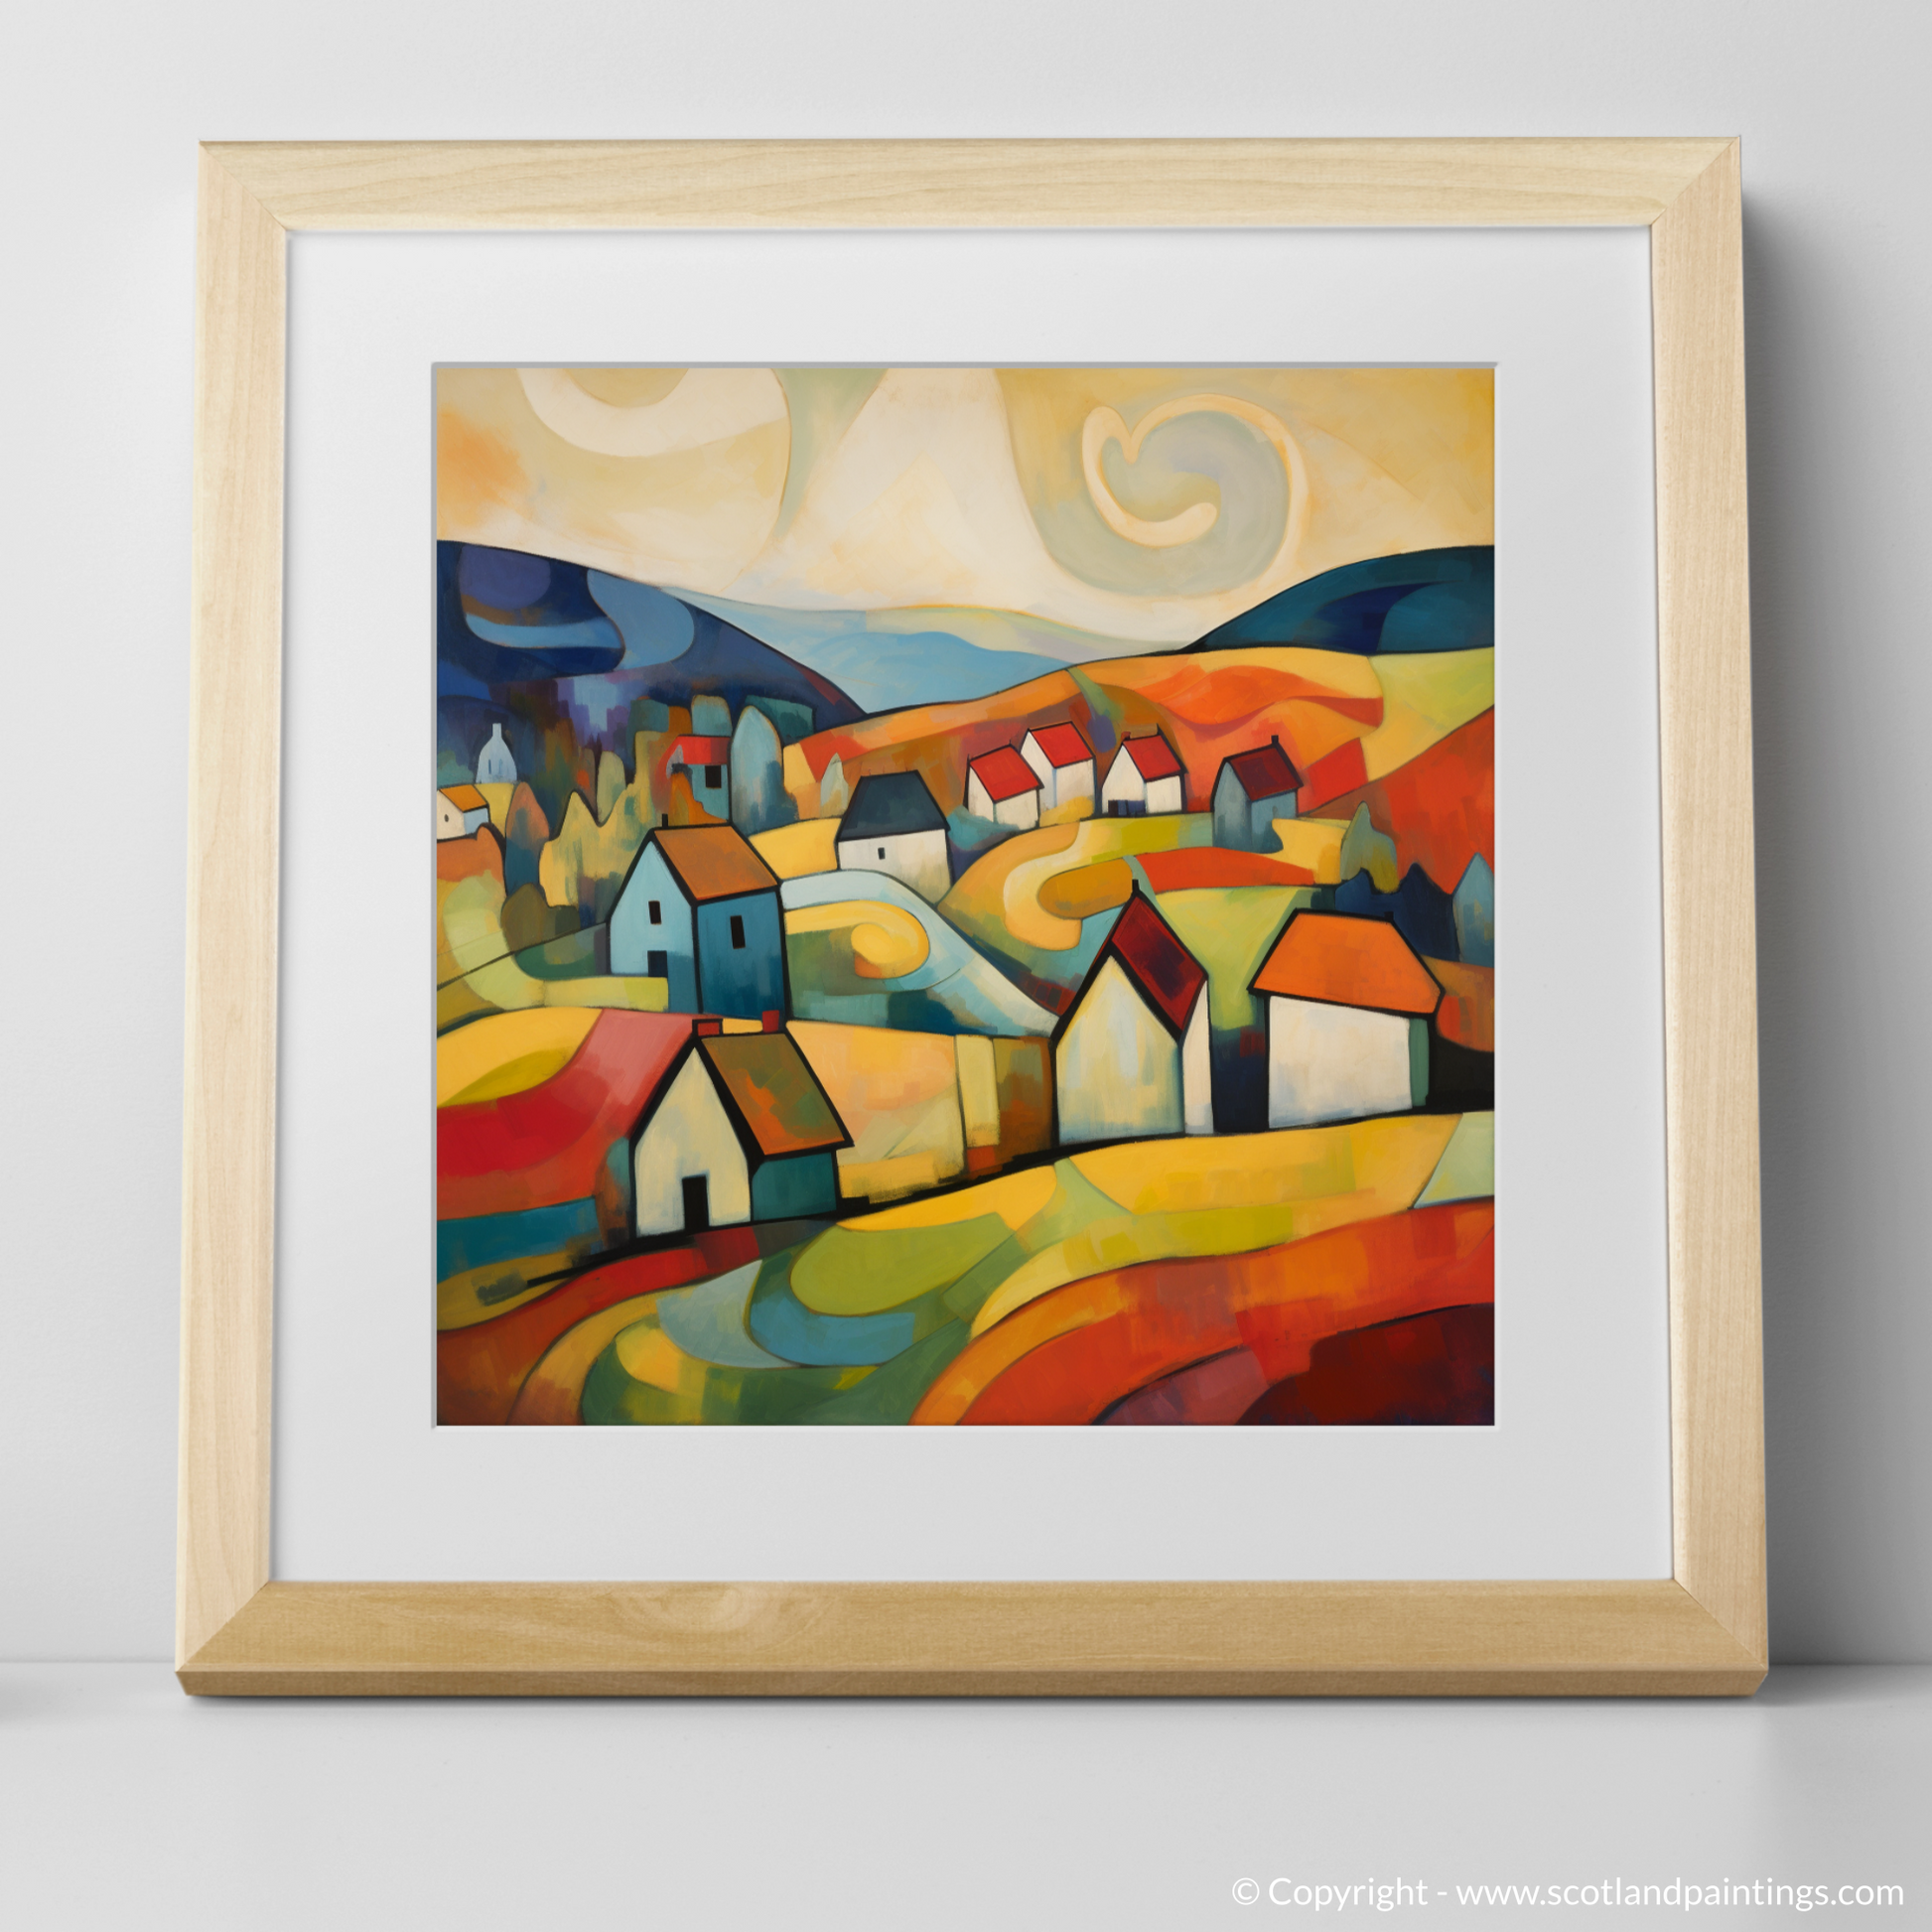 Art Print of Glenmore, Highlands with a natural frame